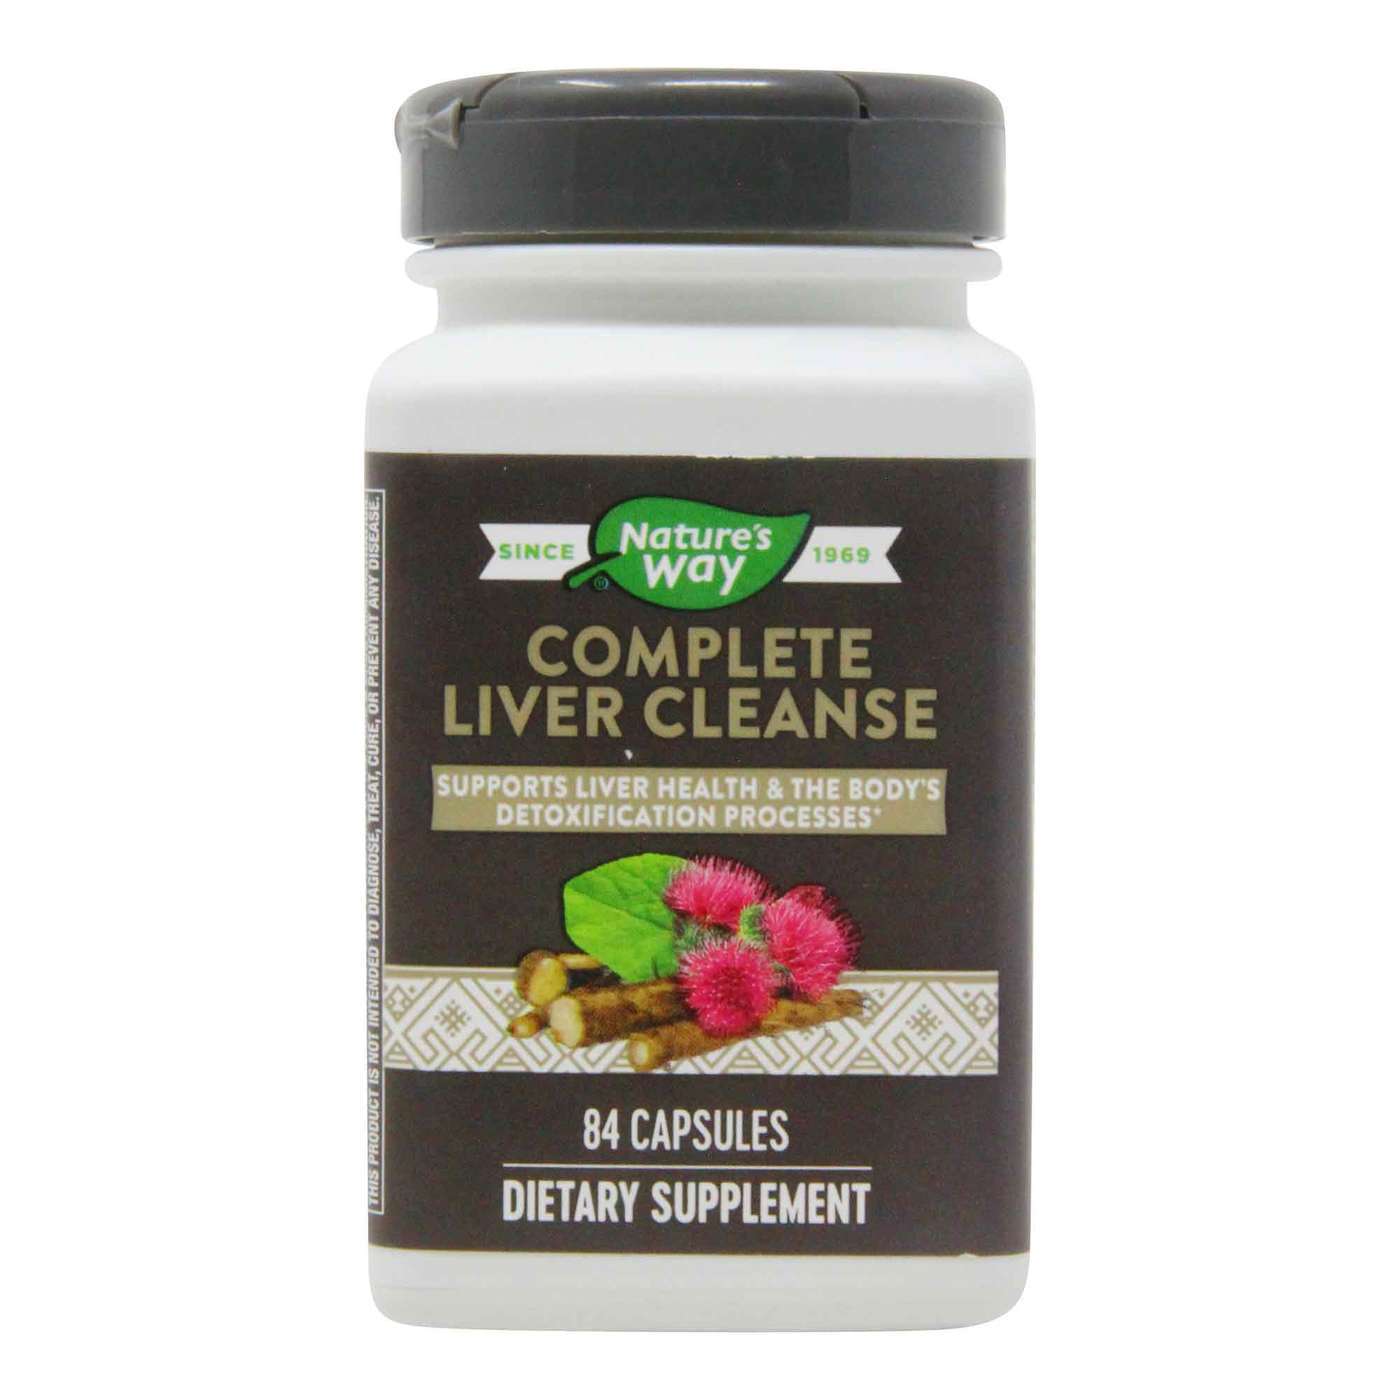 NATURE’S WAY COMPLETE LIVER CLEANSE